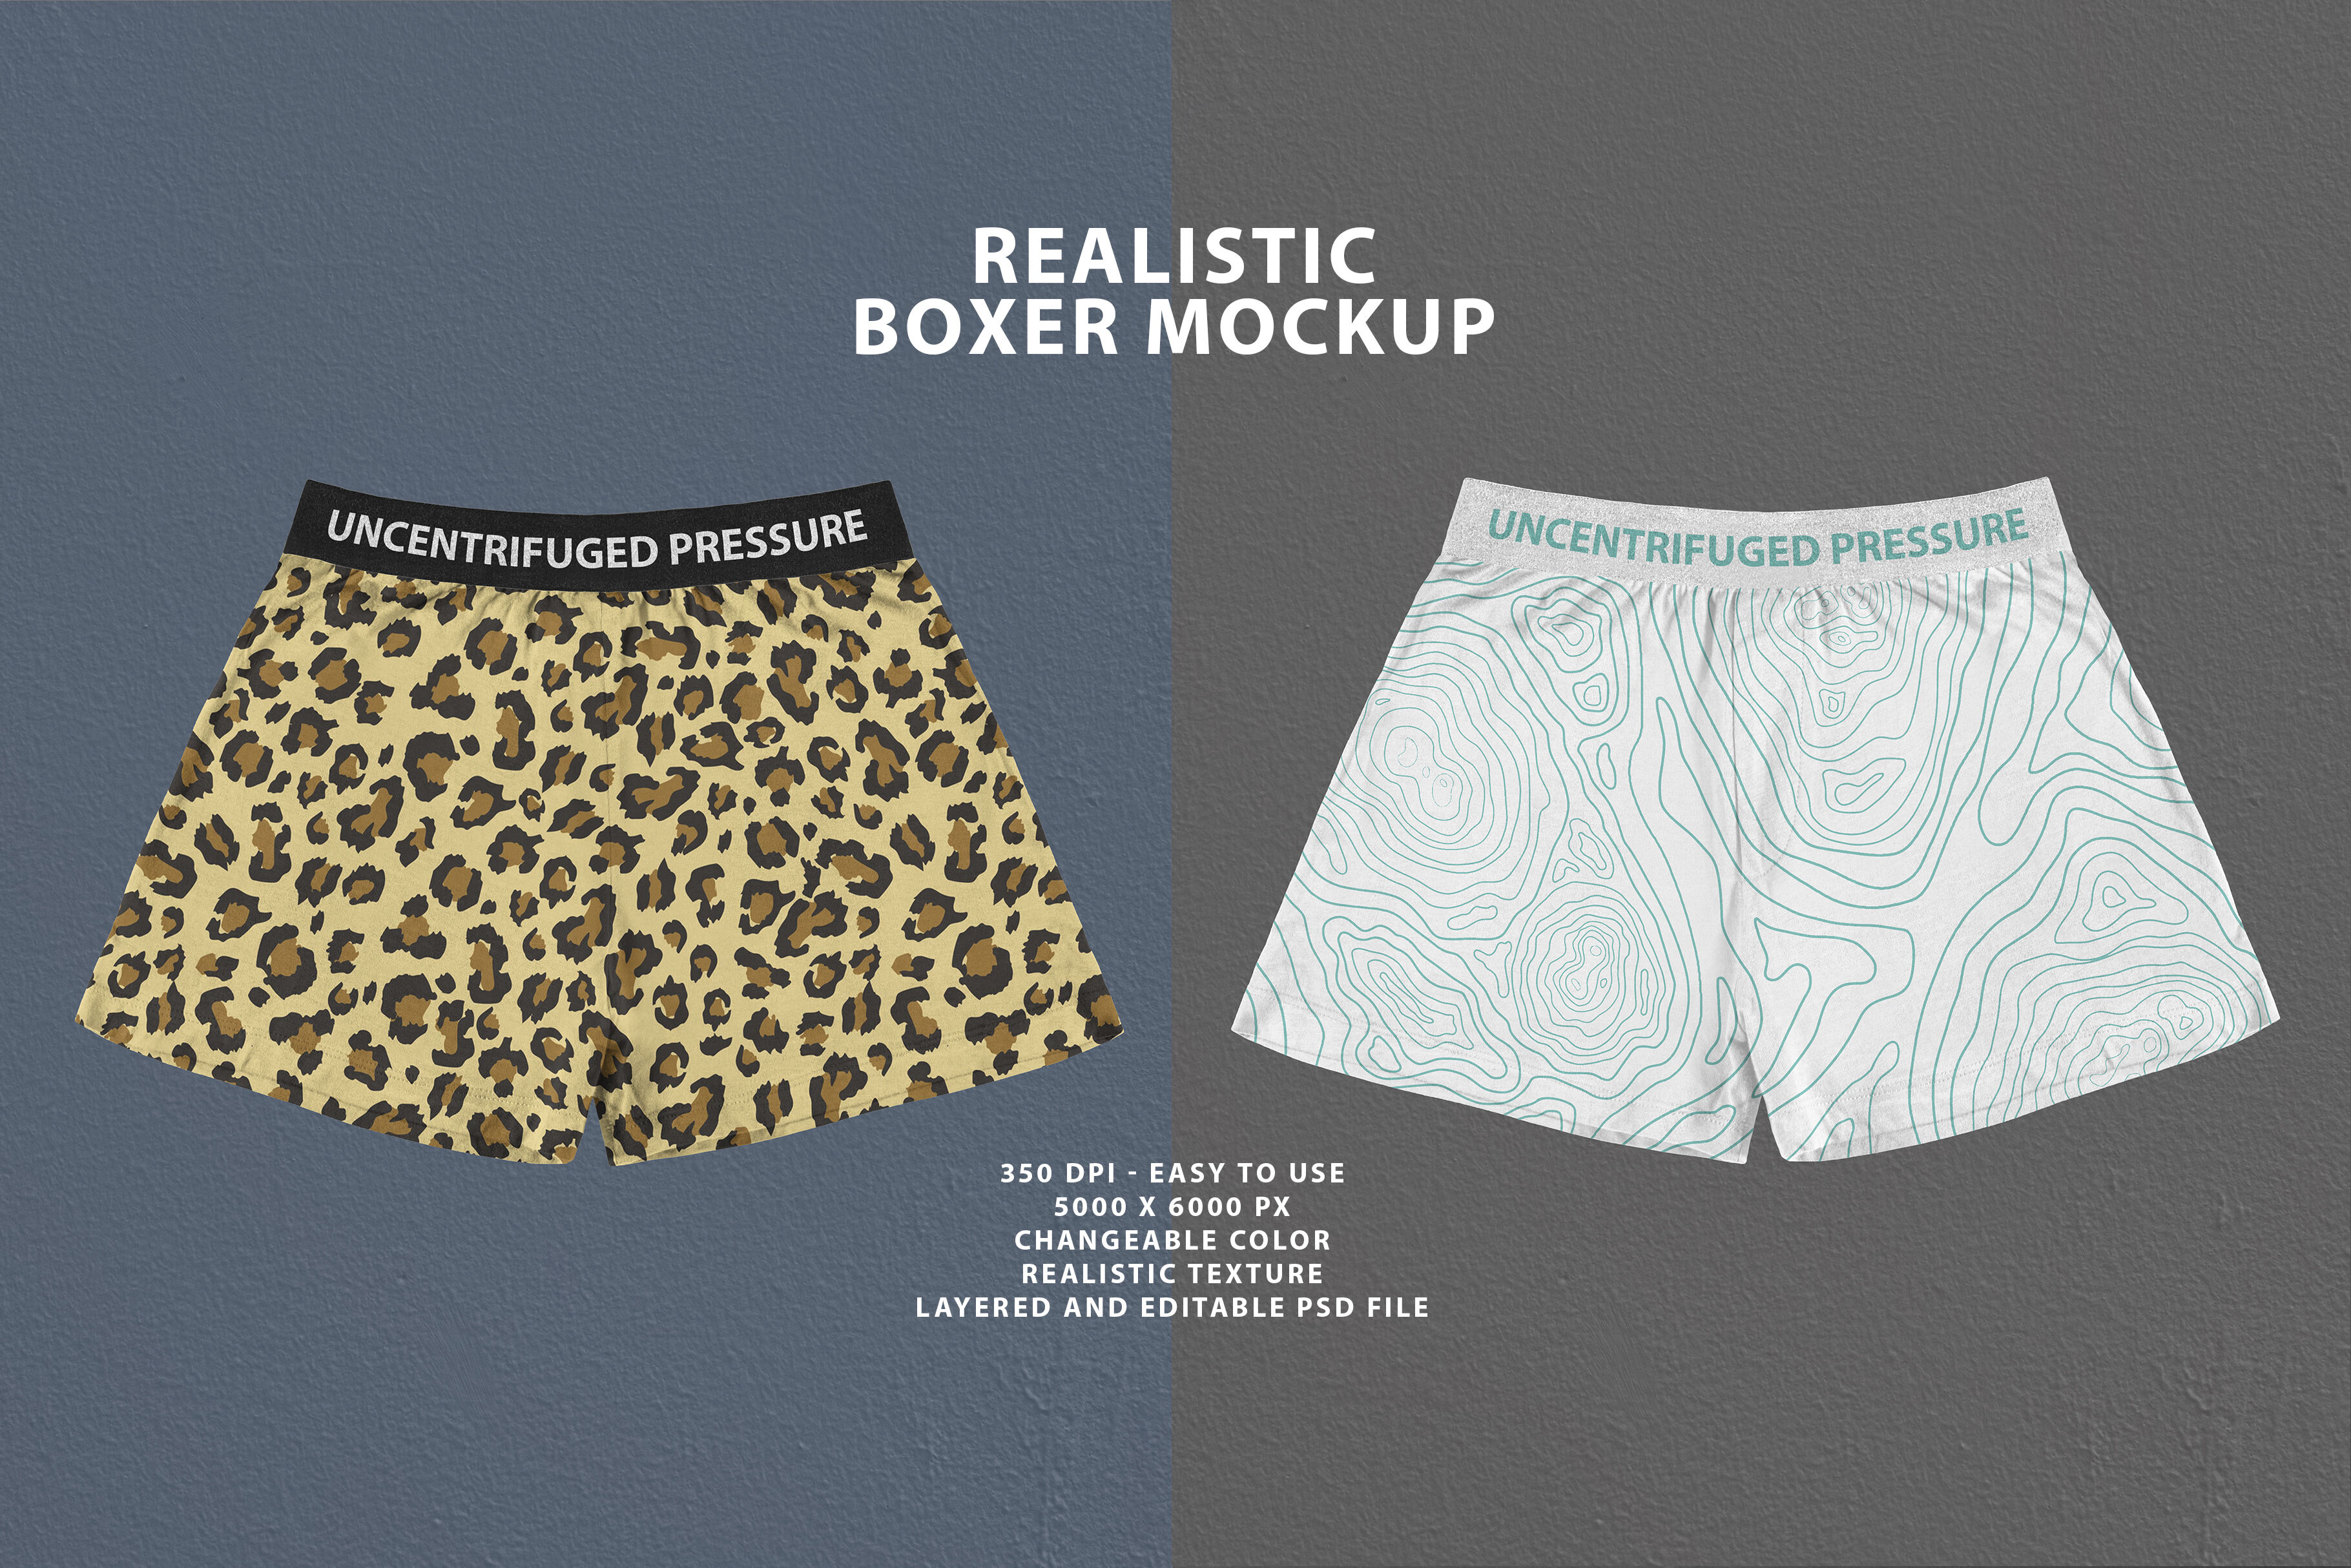 Boxer Mockup By Uncentrifuged Pressure